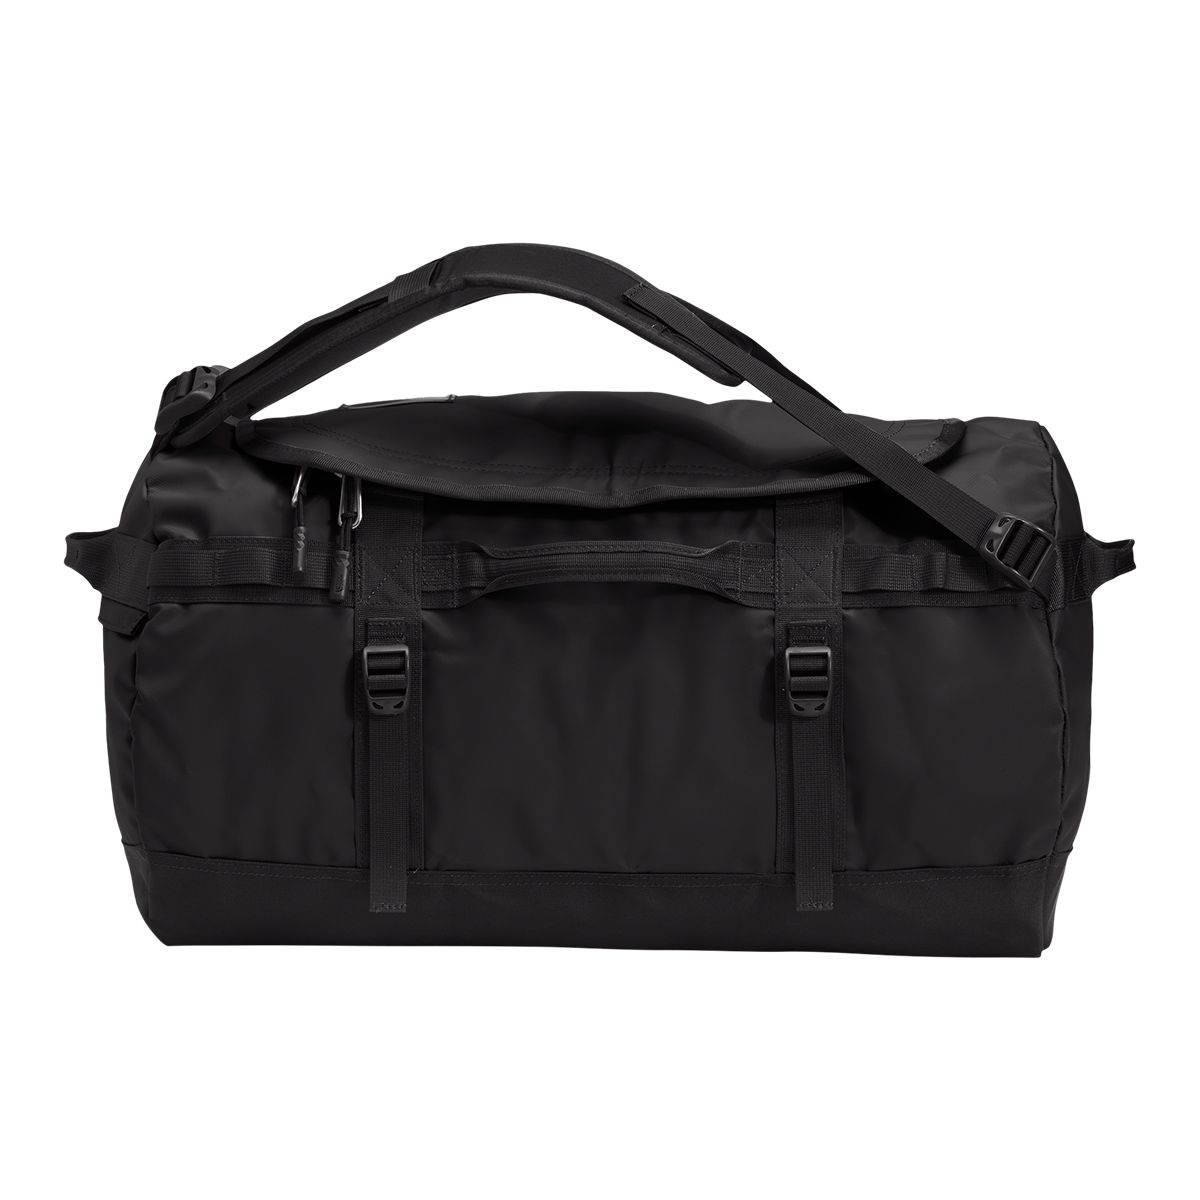 The North Face Base Camp 50L Small Duffel Bag